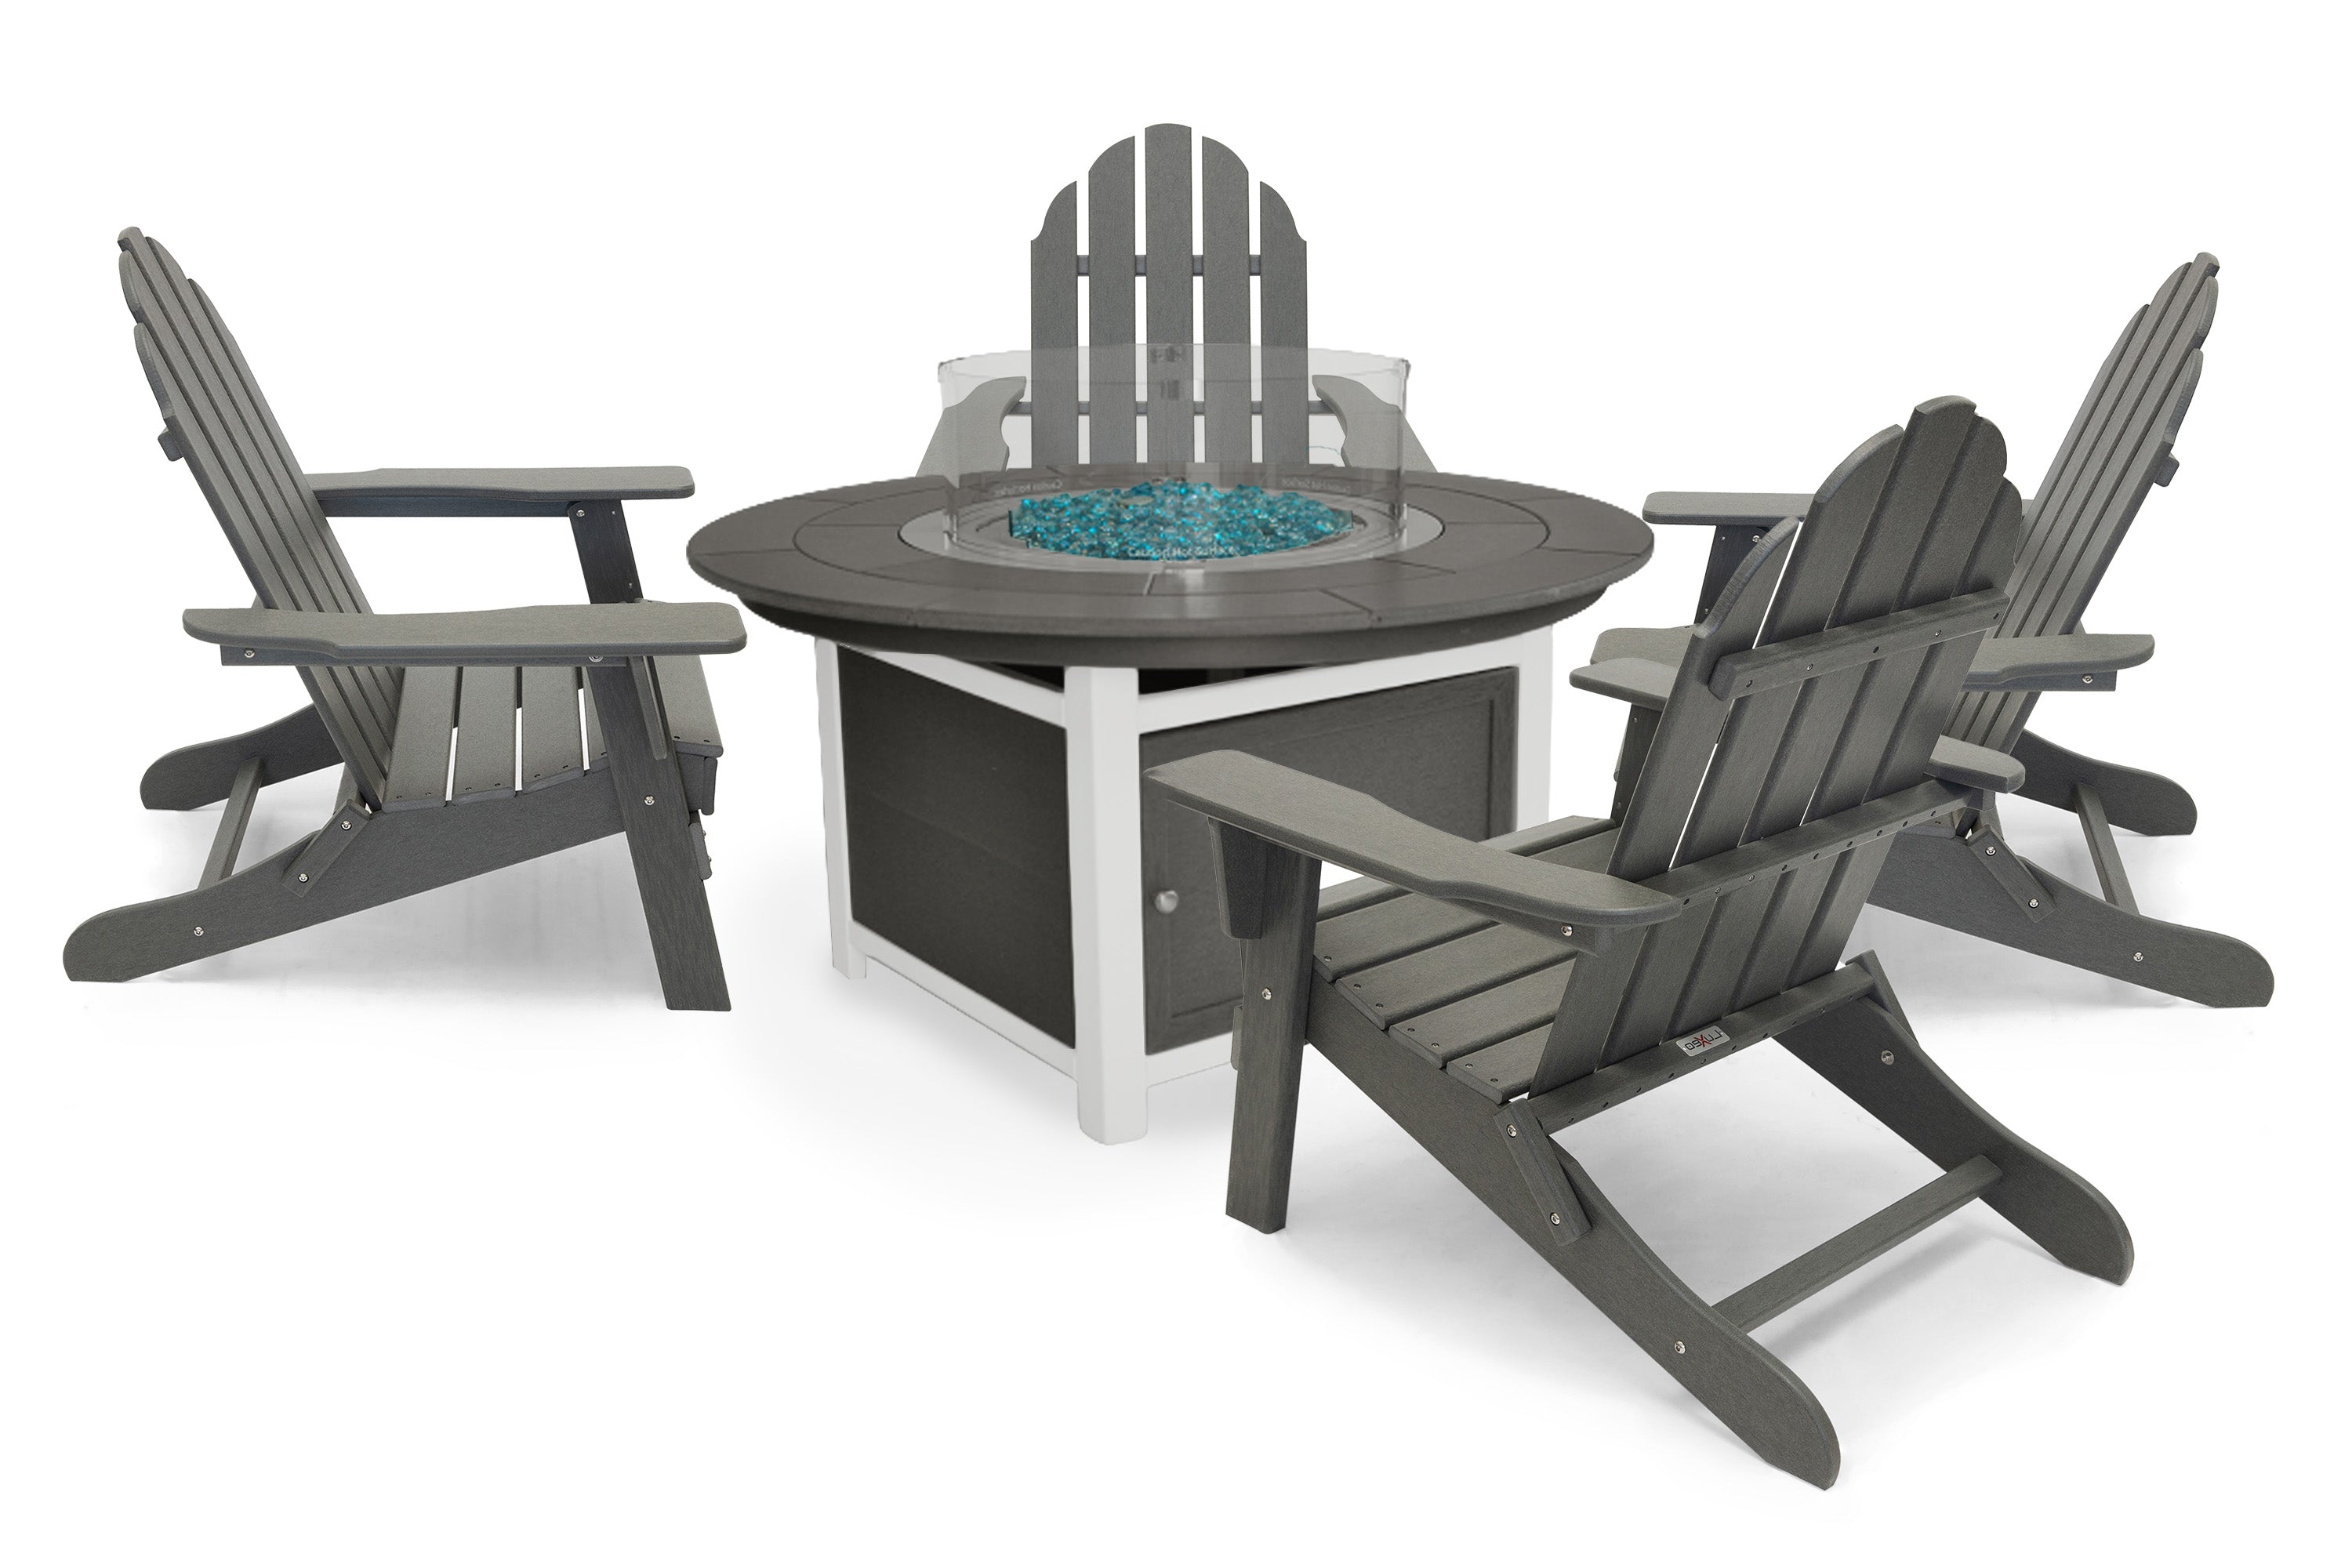 LuXeo Vail 48" Two-Tone Fire Pit Table, Round Top with Four Balboa Chairs